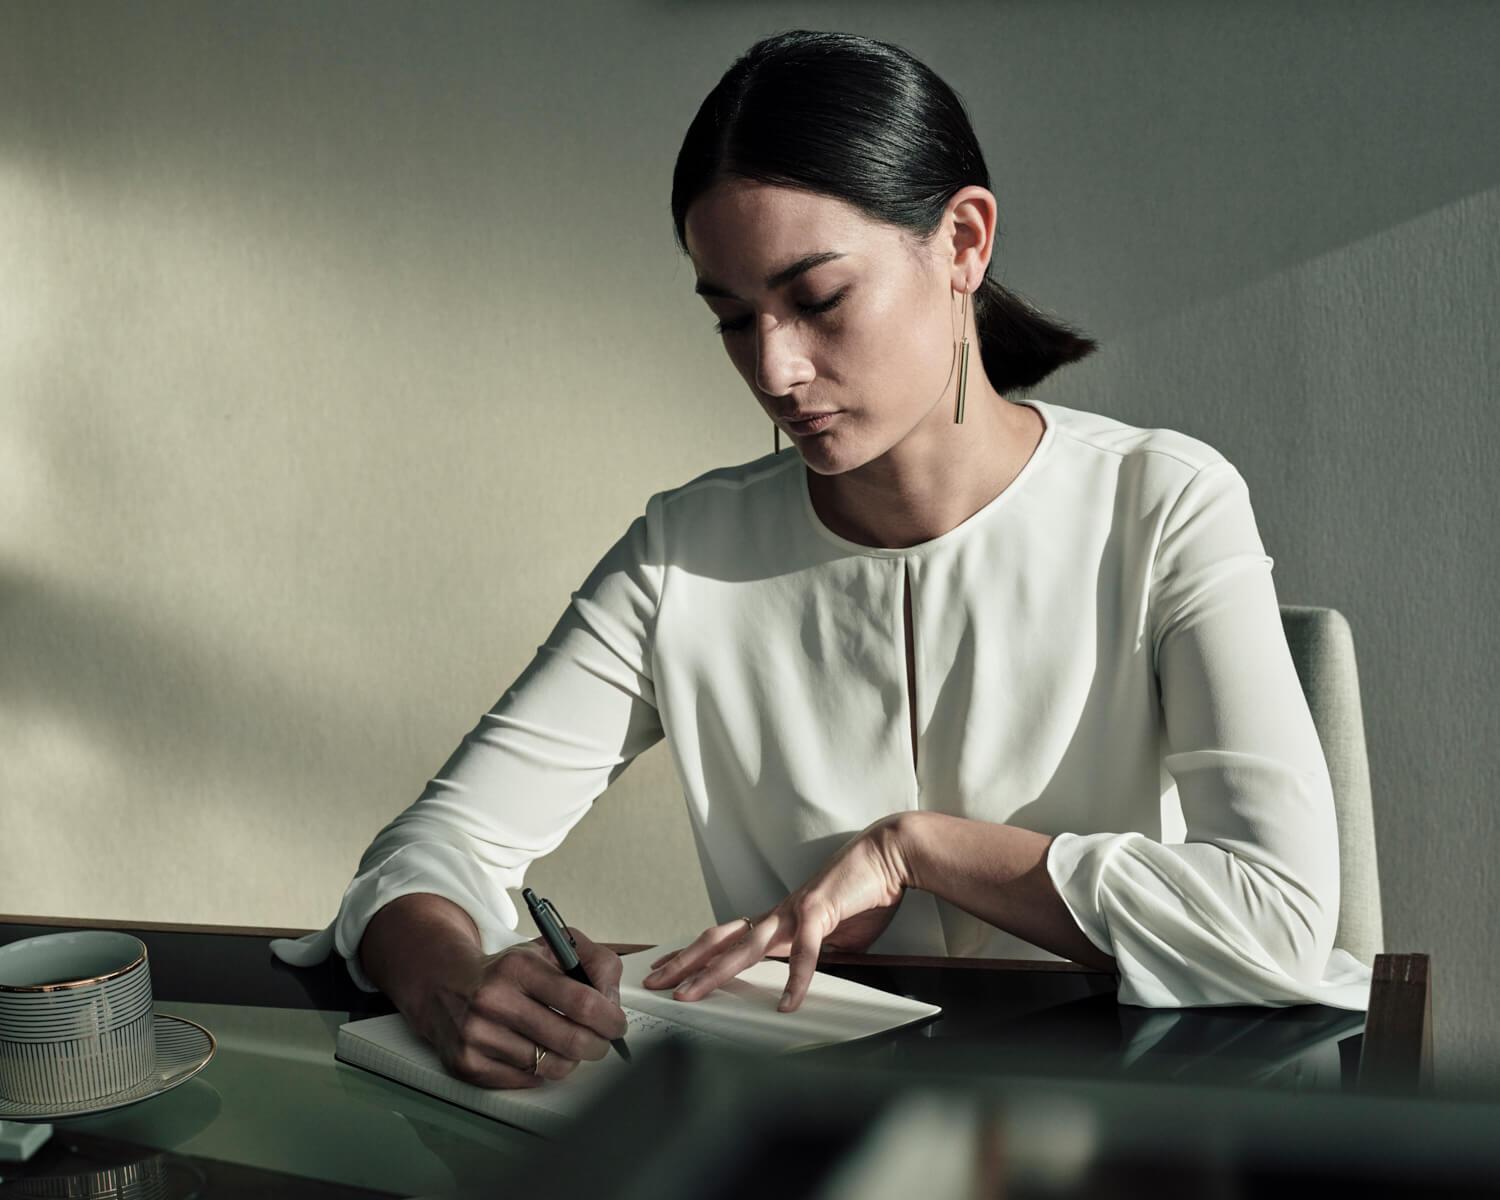 Woman, at home desk, by lifestyle photographer Tim Cole